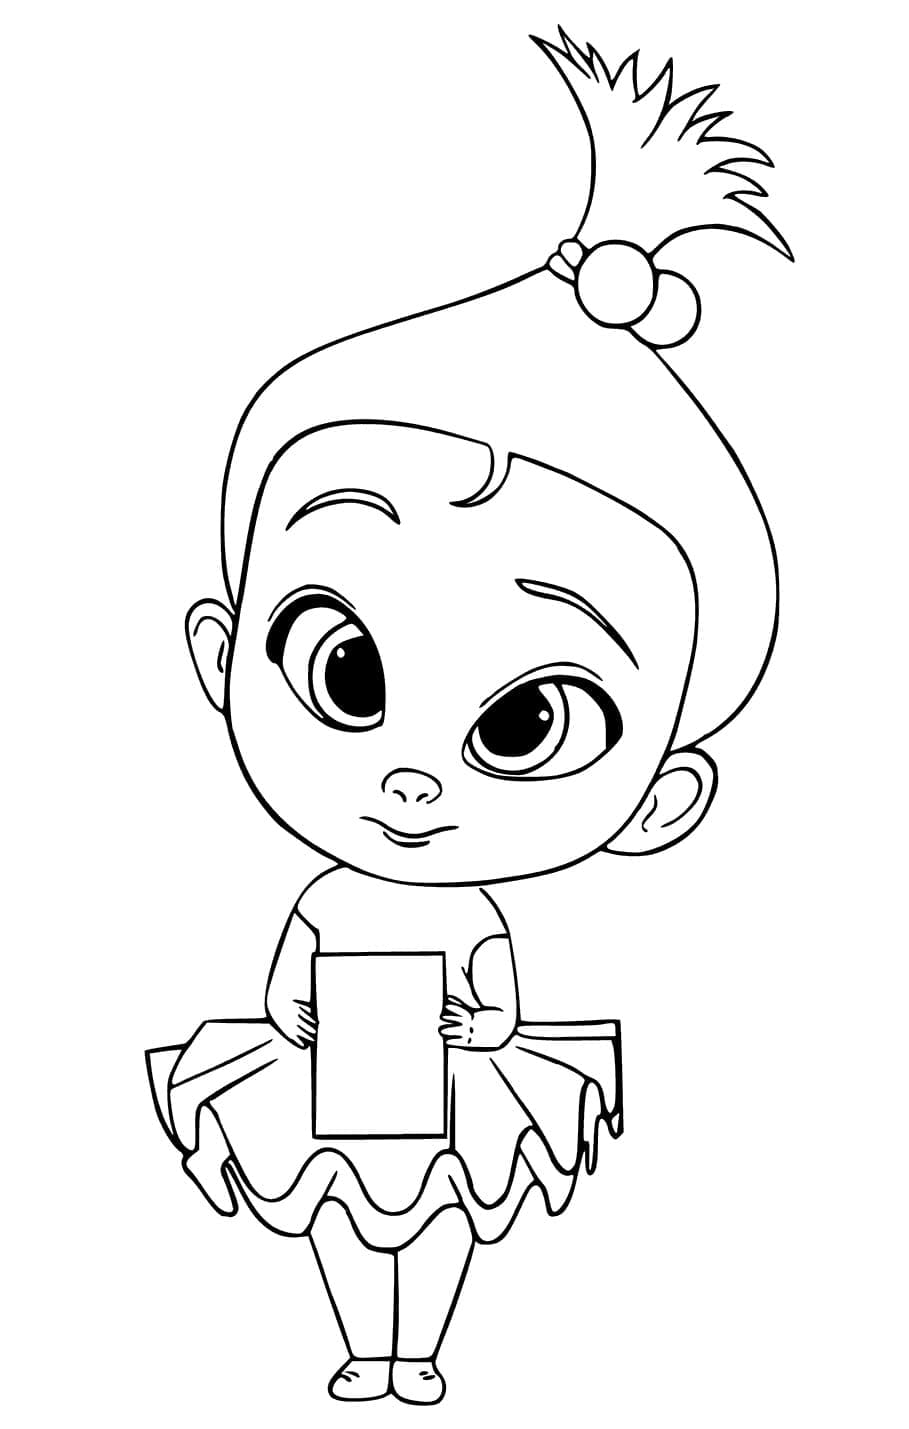 Staci de Baby Boss coloring page